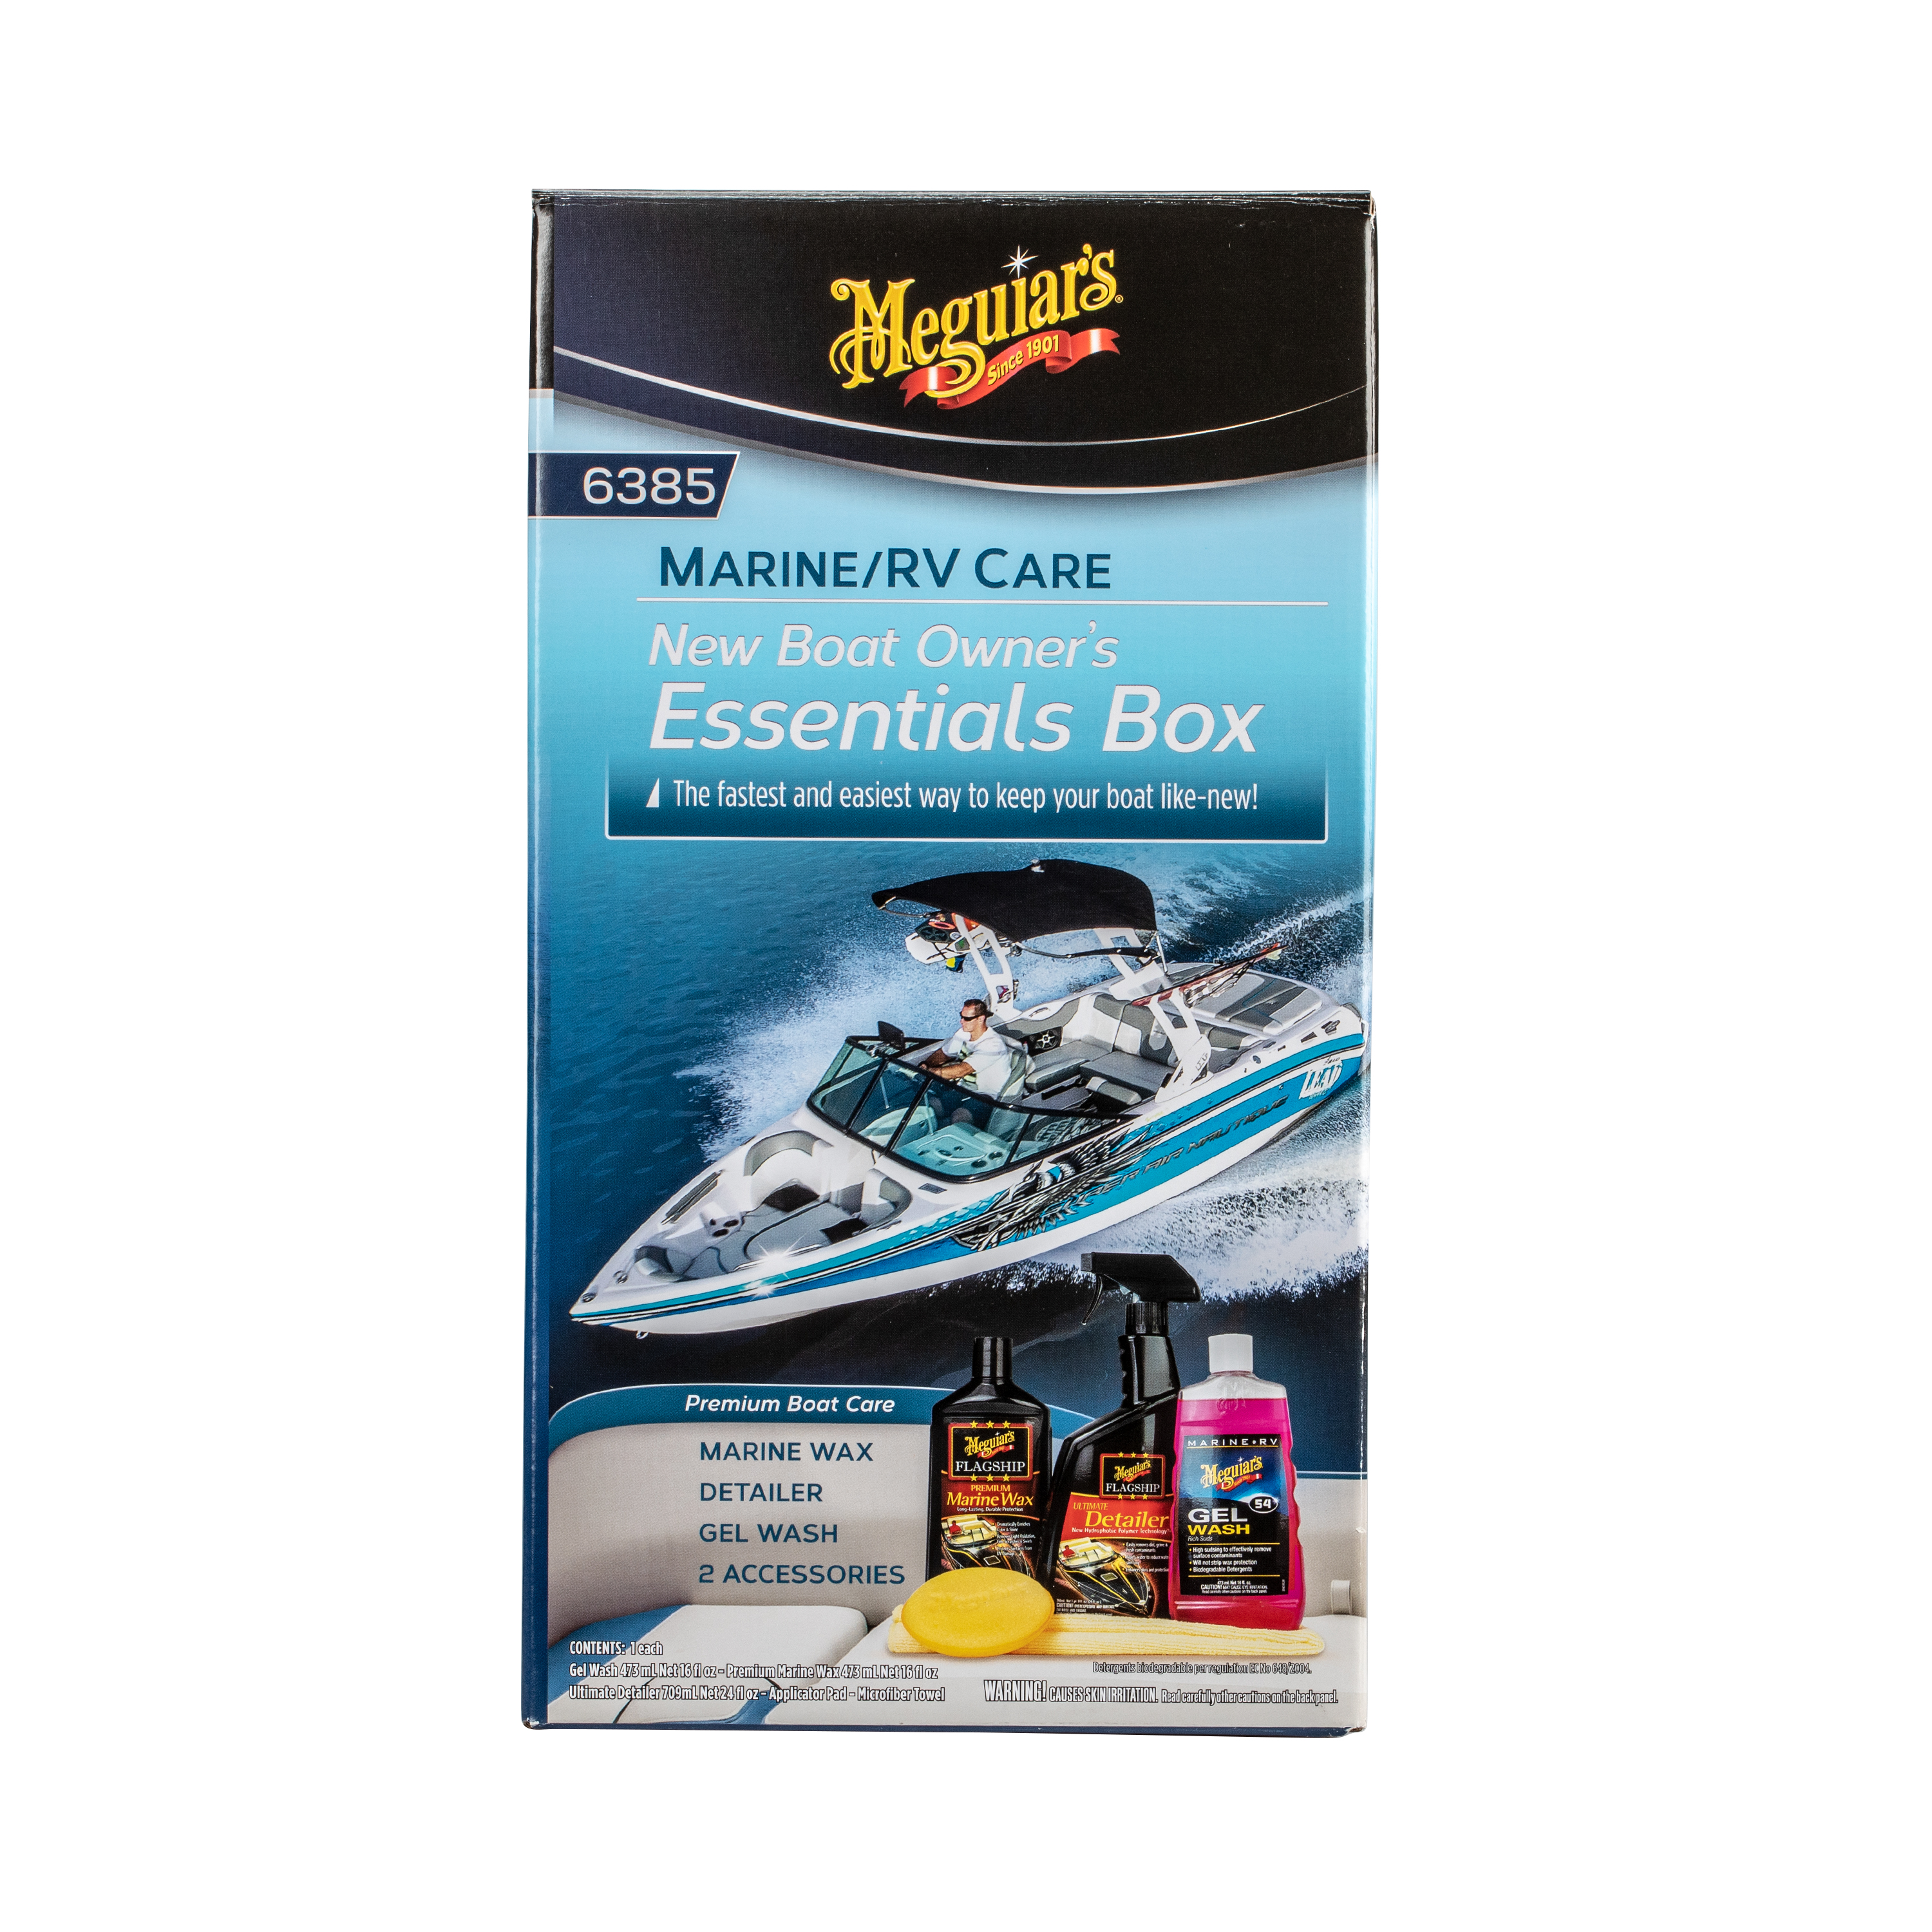 Meguiar’s M6385 Marine/RV Care New Boat Owner’s Essentials Box Kit, 1 Pack - image 4 of 9